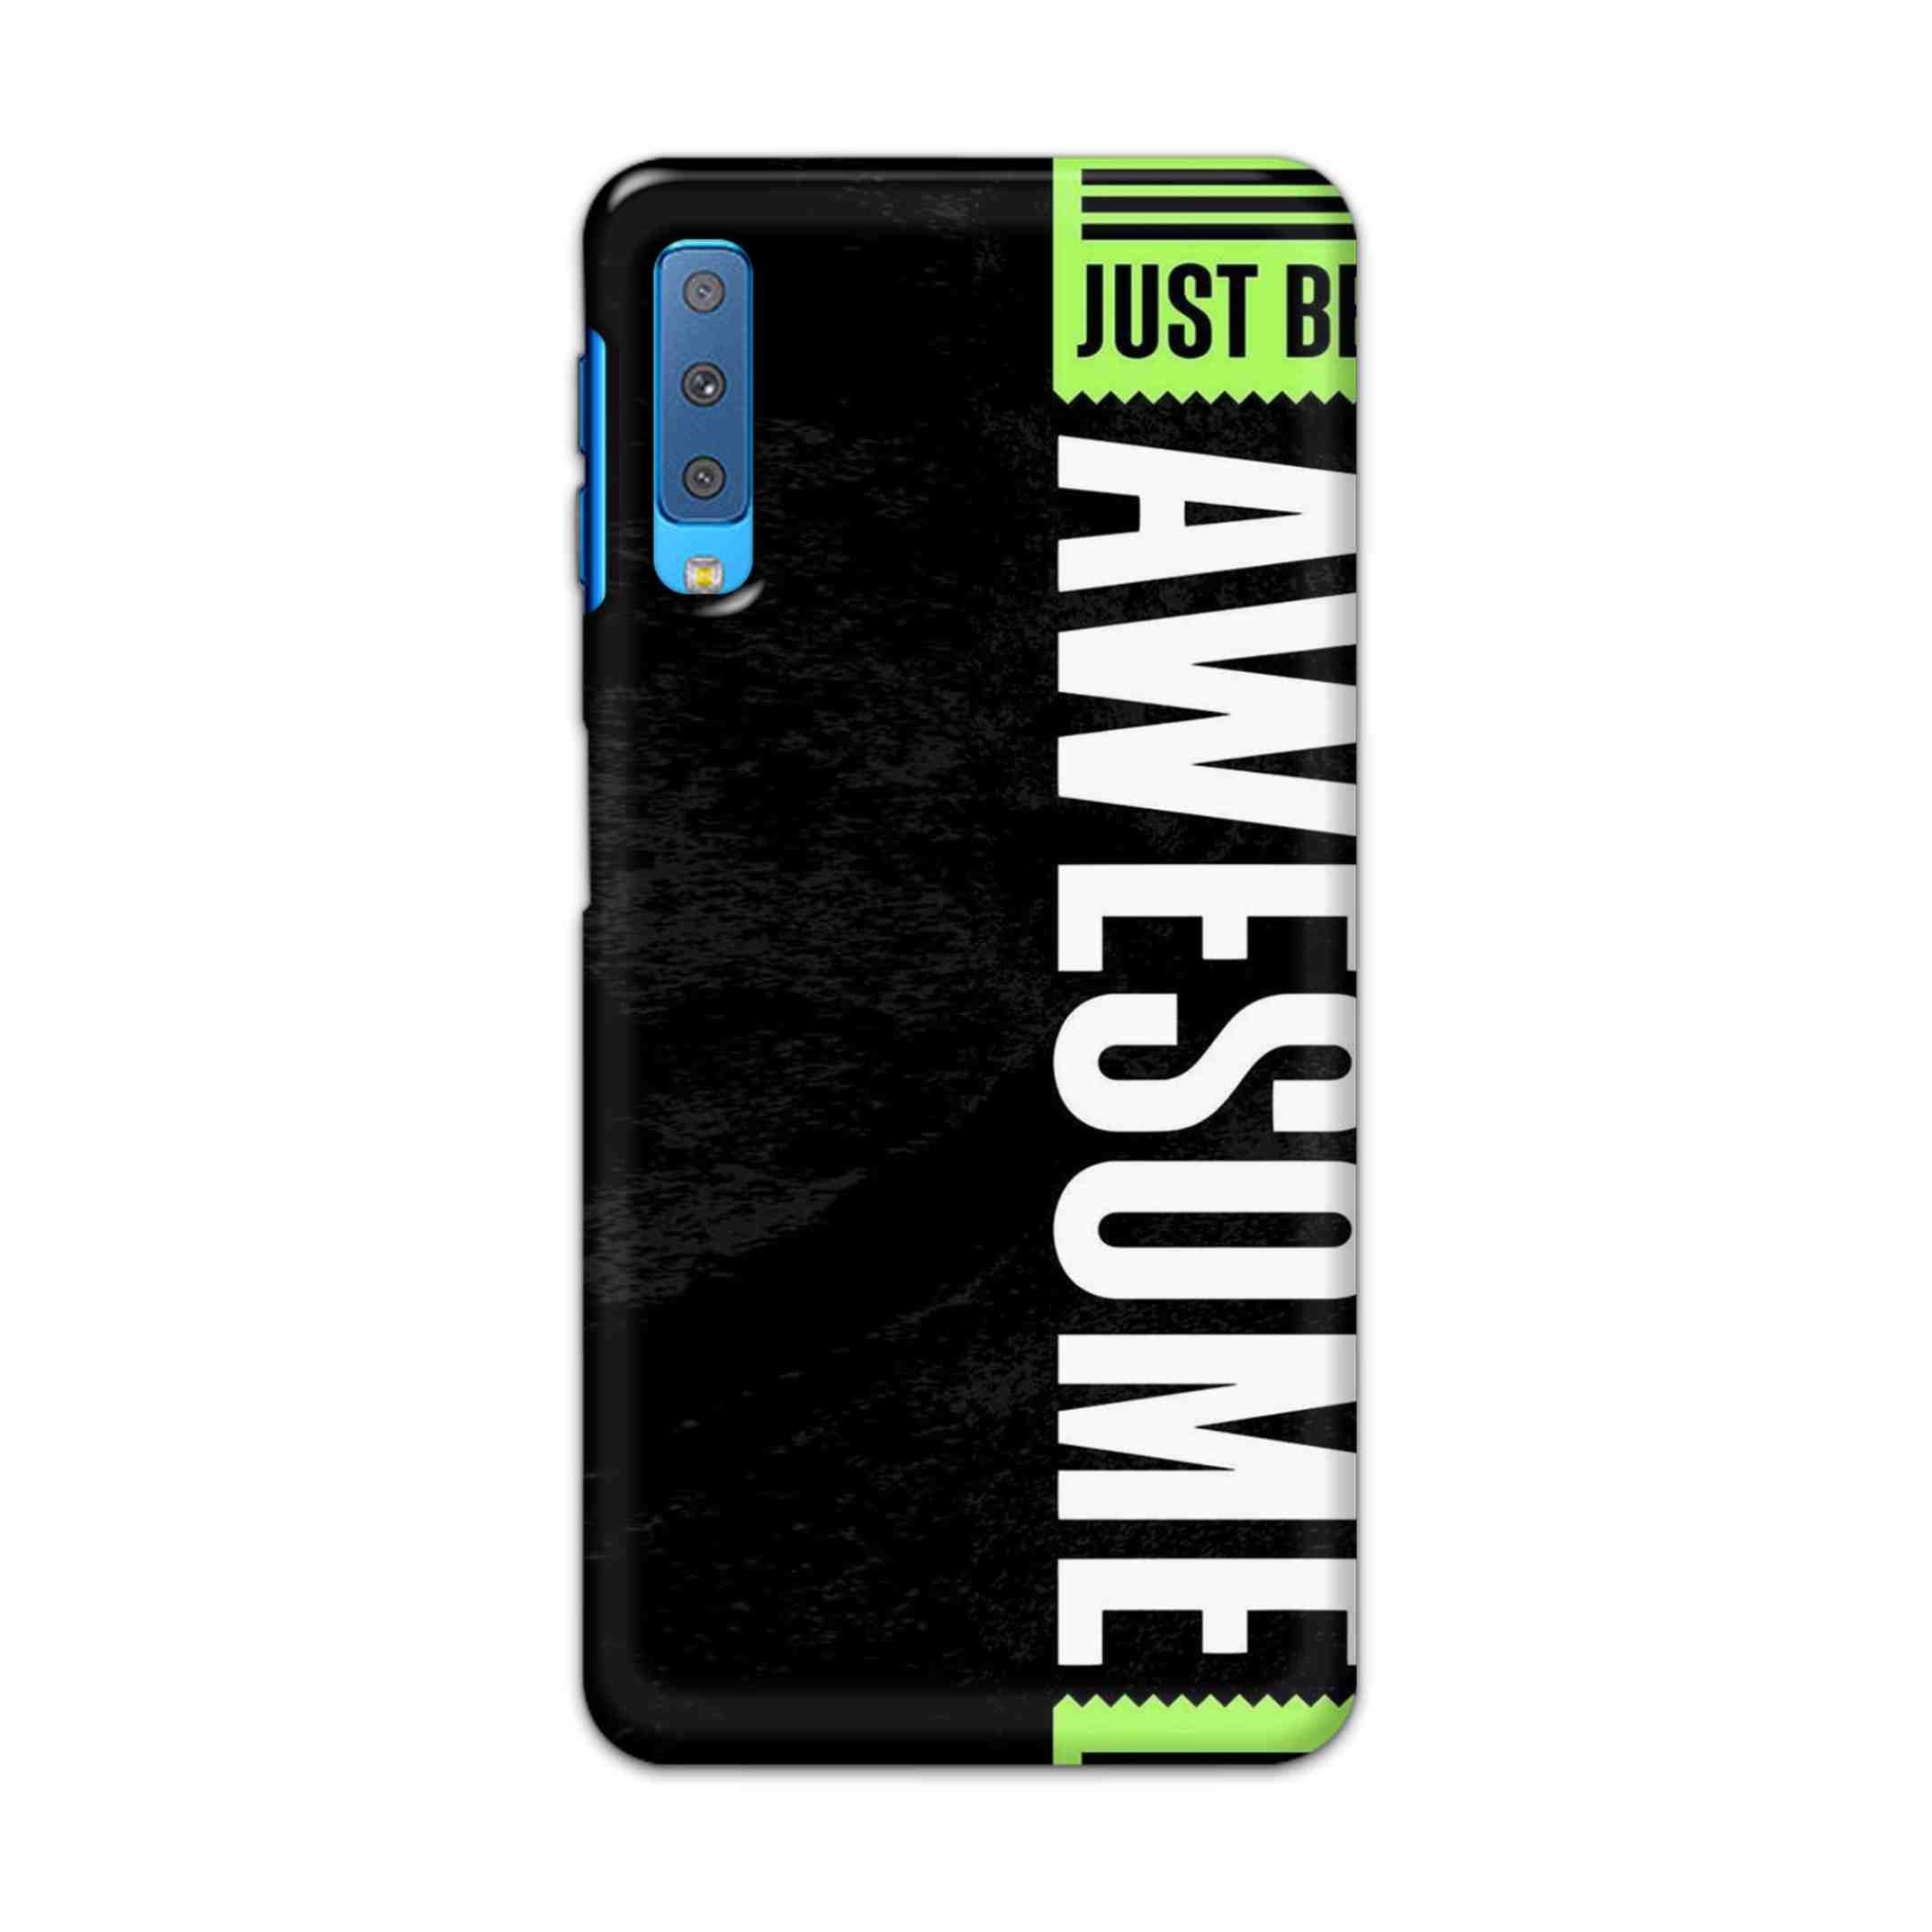 Buy Awesome Street Hard Back Mobile Phone Case Cover For Samsung Galaxy A7 2018 Online